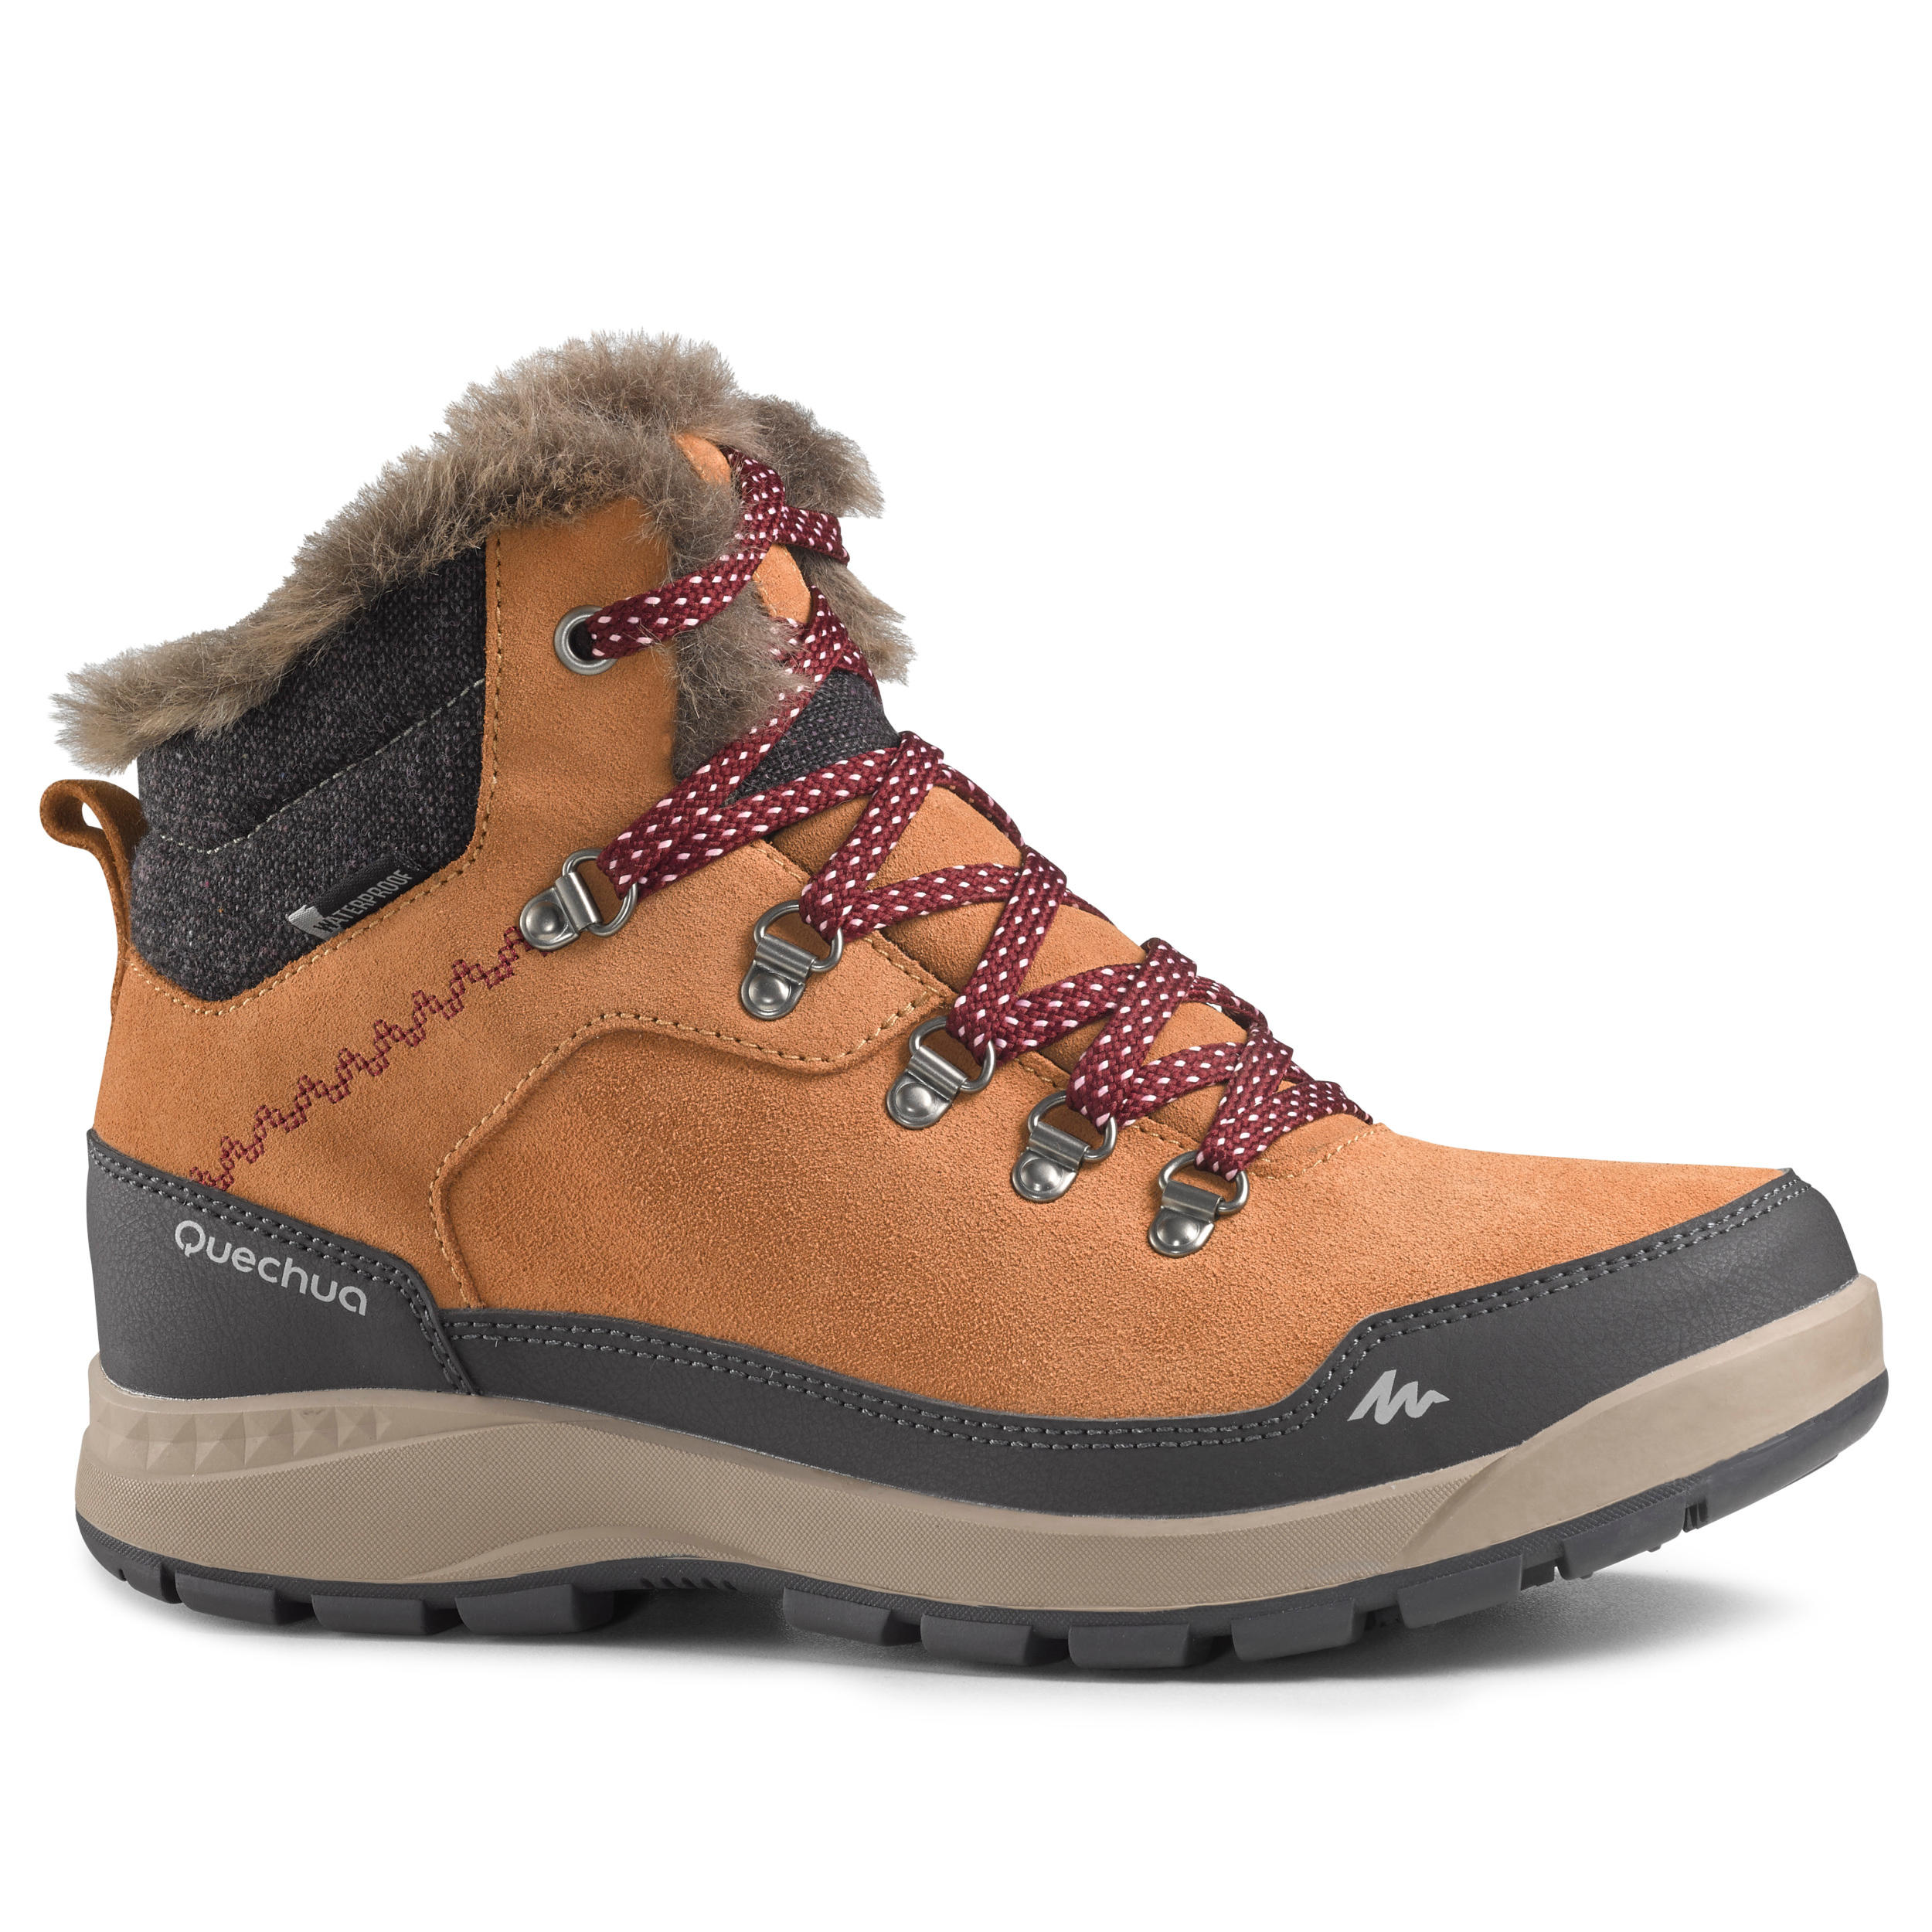 decathlon shoes for snow